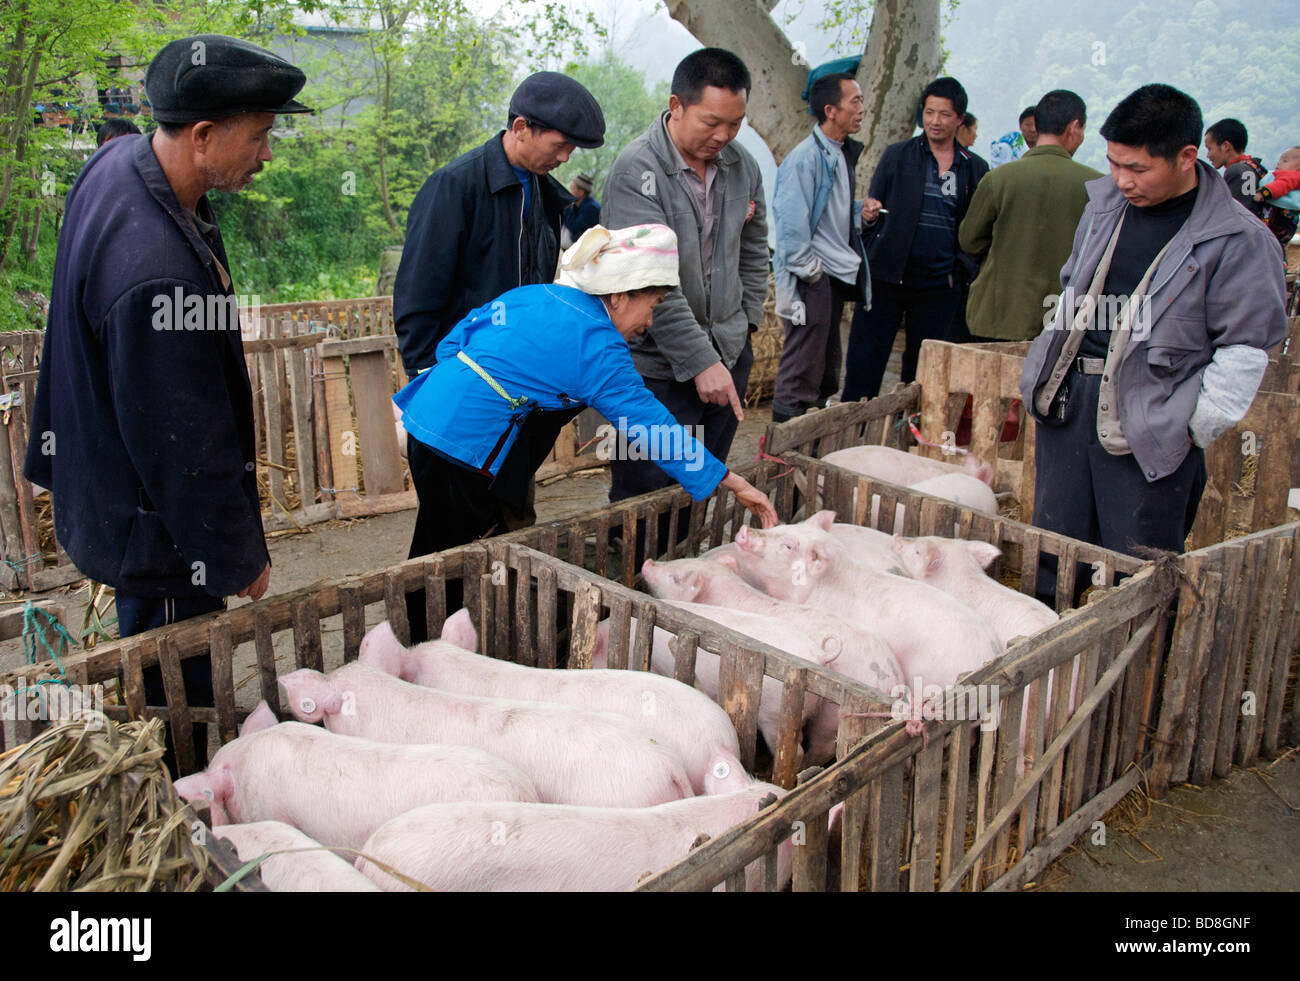 People selecting a pig in market Guizhou Province China Stock Photo